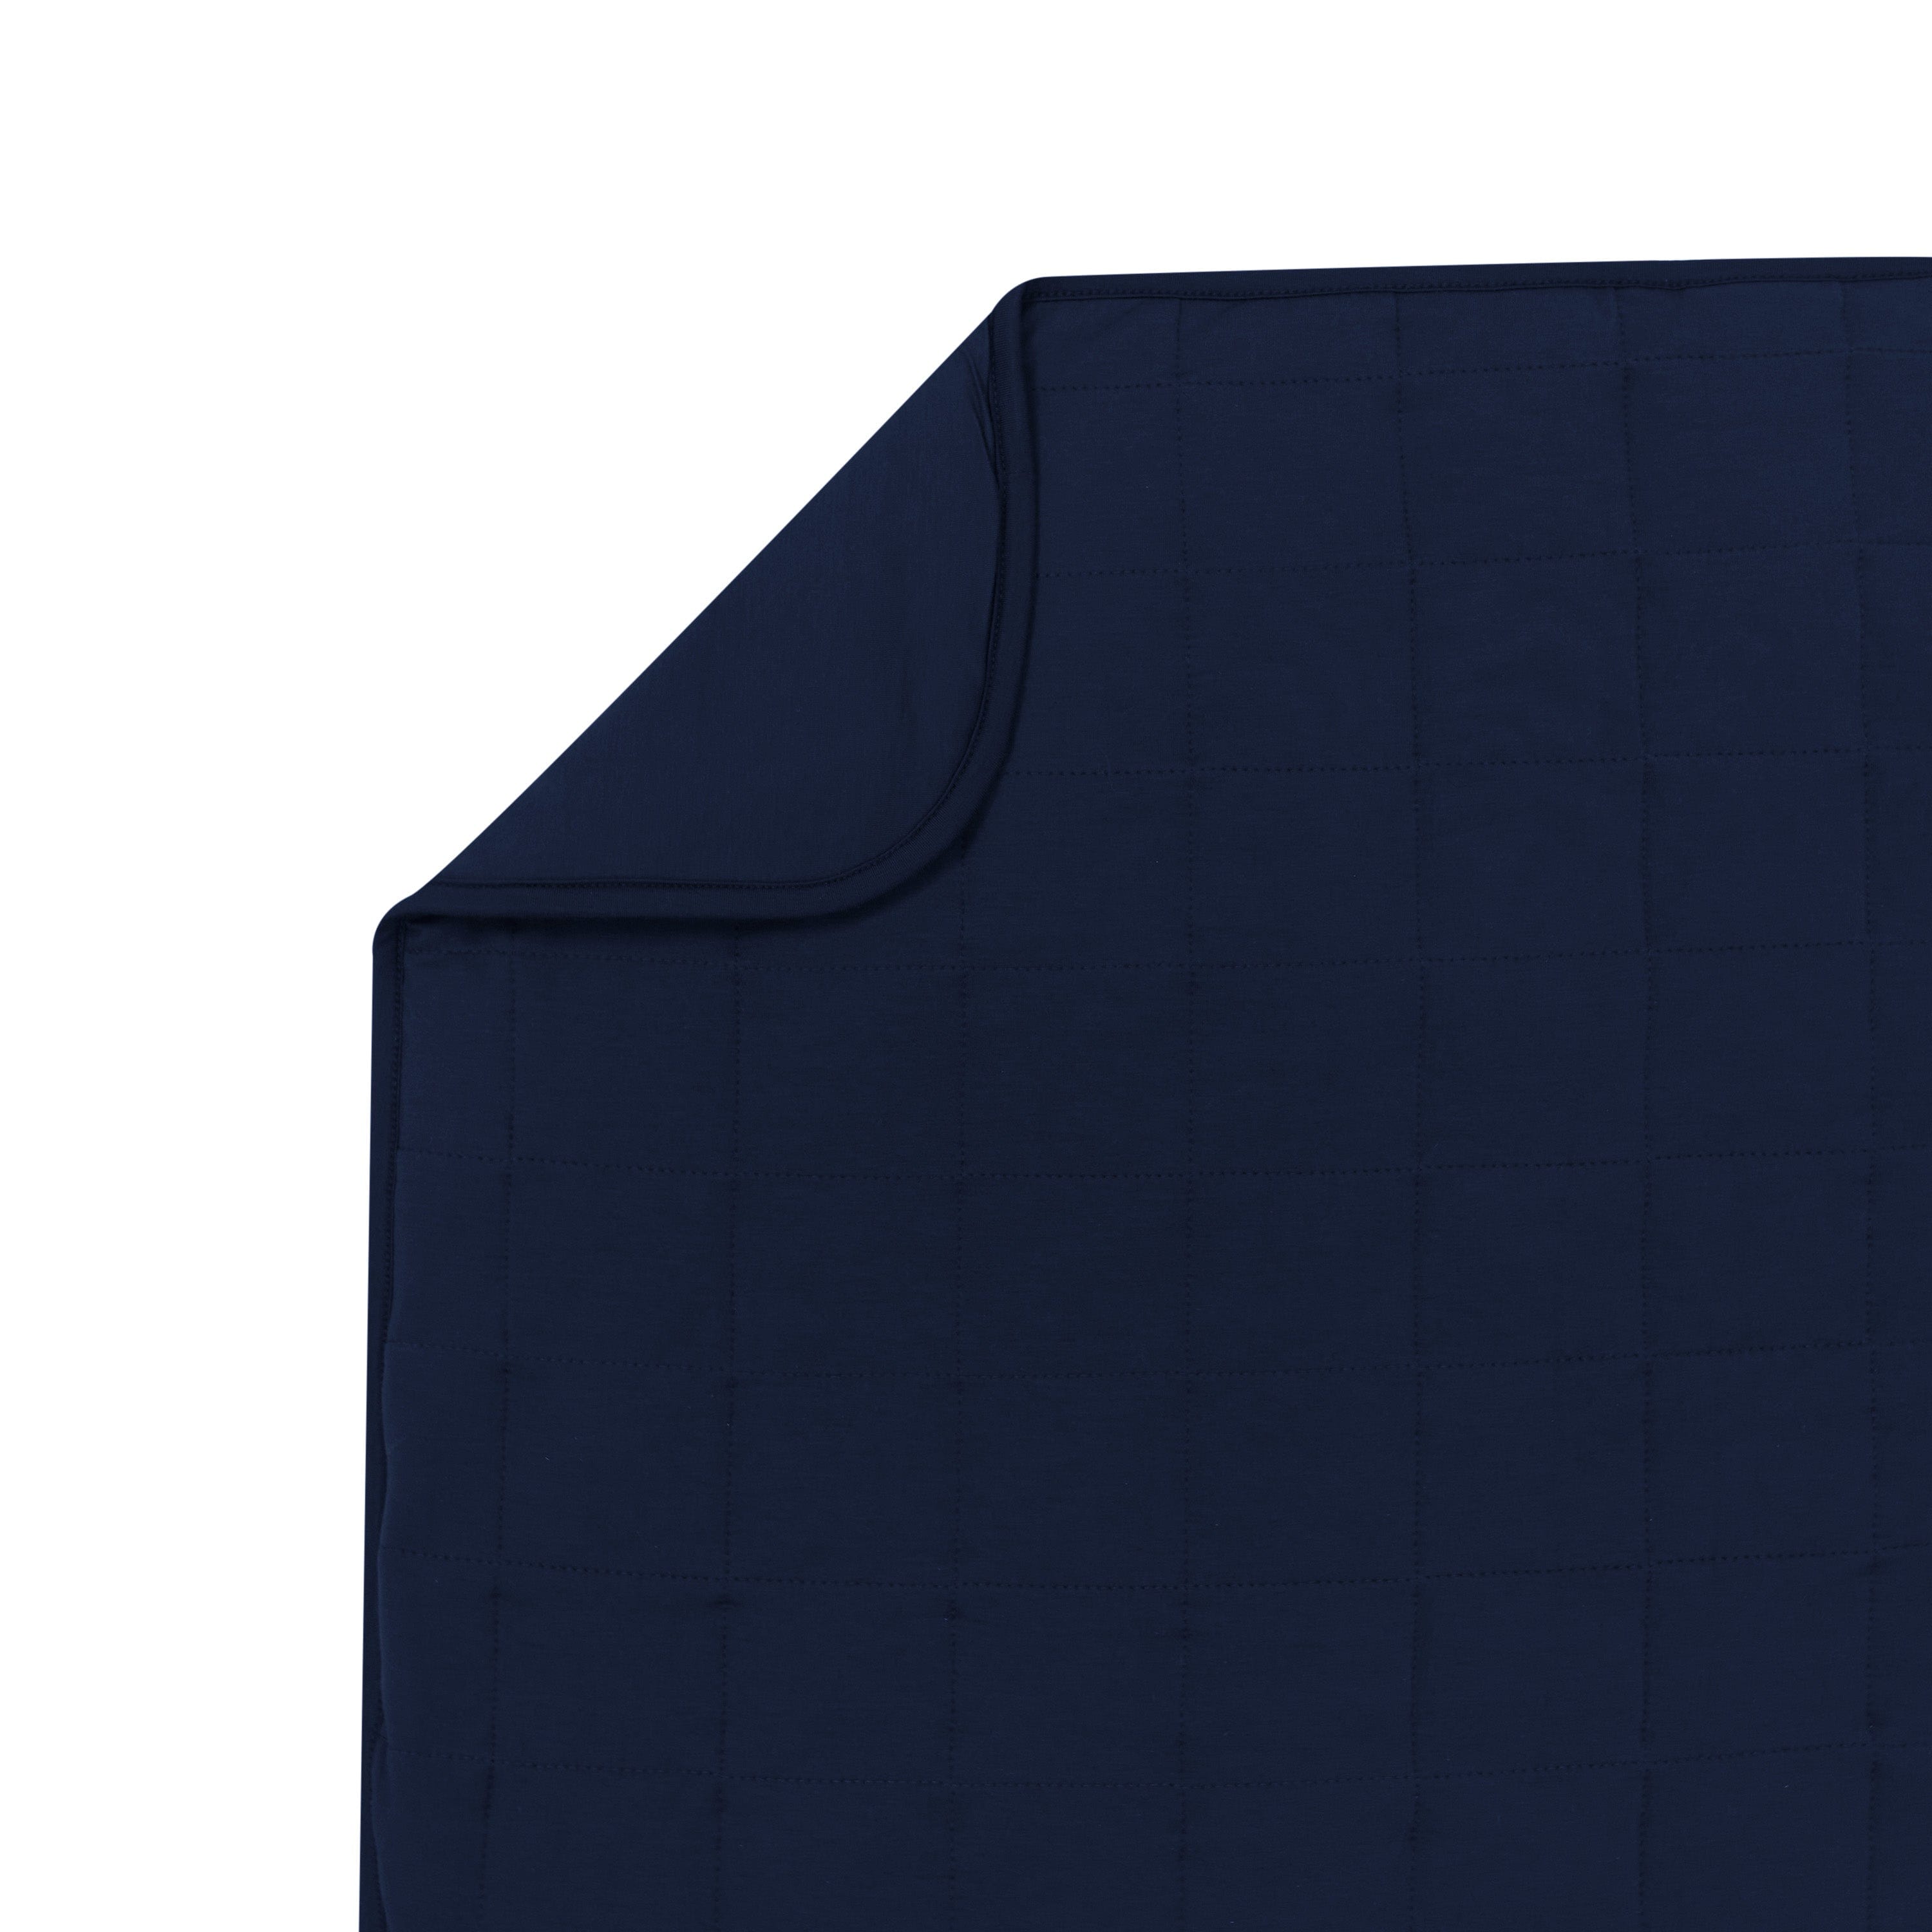 Kyte Baby Adult Blanket 1.0 Navy / Adult Adult Quilted Blanket in Navy 1.0